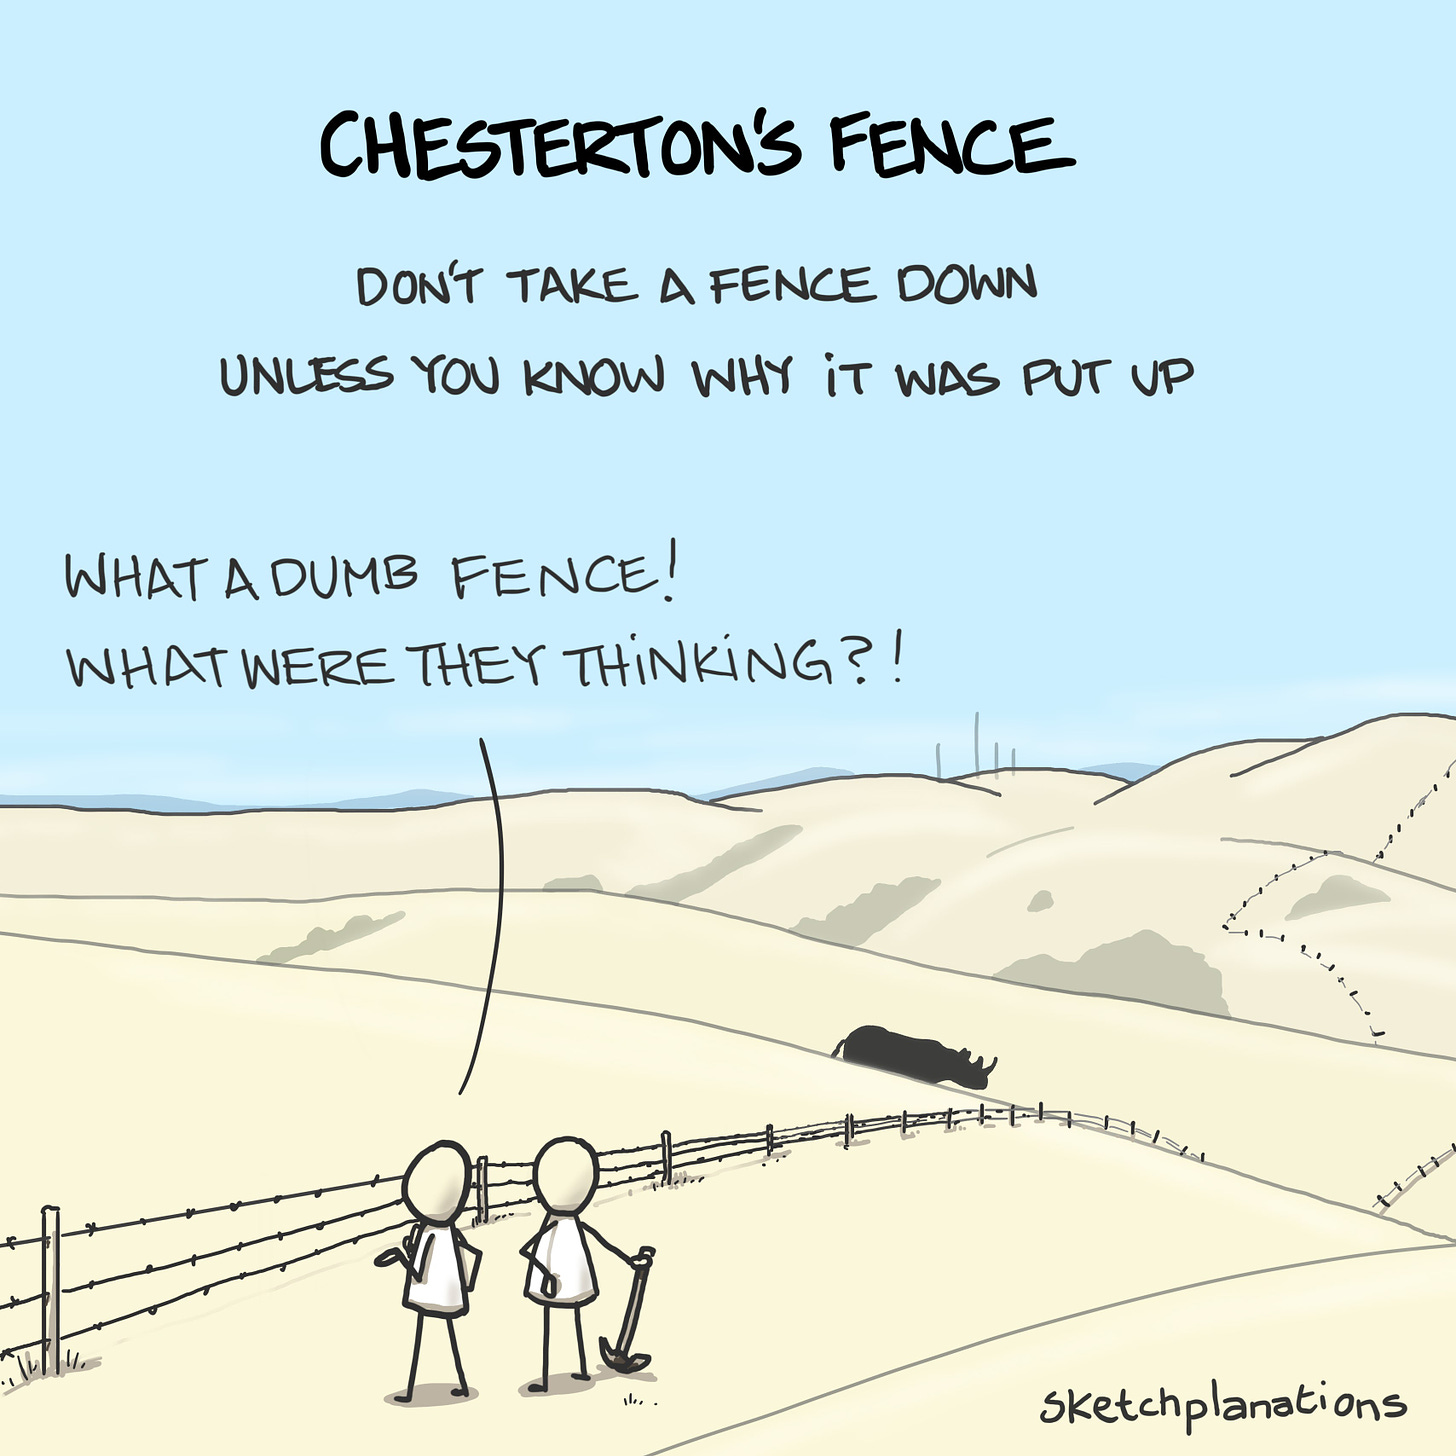 Chesterton's fence: two people contemplate a barbed wire fence stretching through rolling hills and wonder why on earth someone would put the fence there, unaware of the large animal down the slope